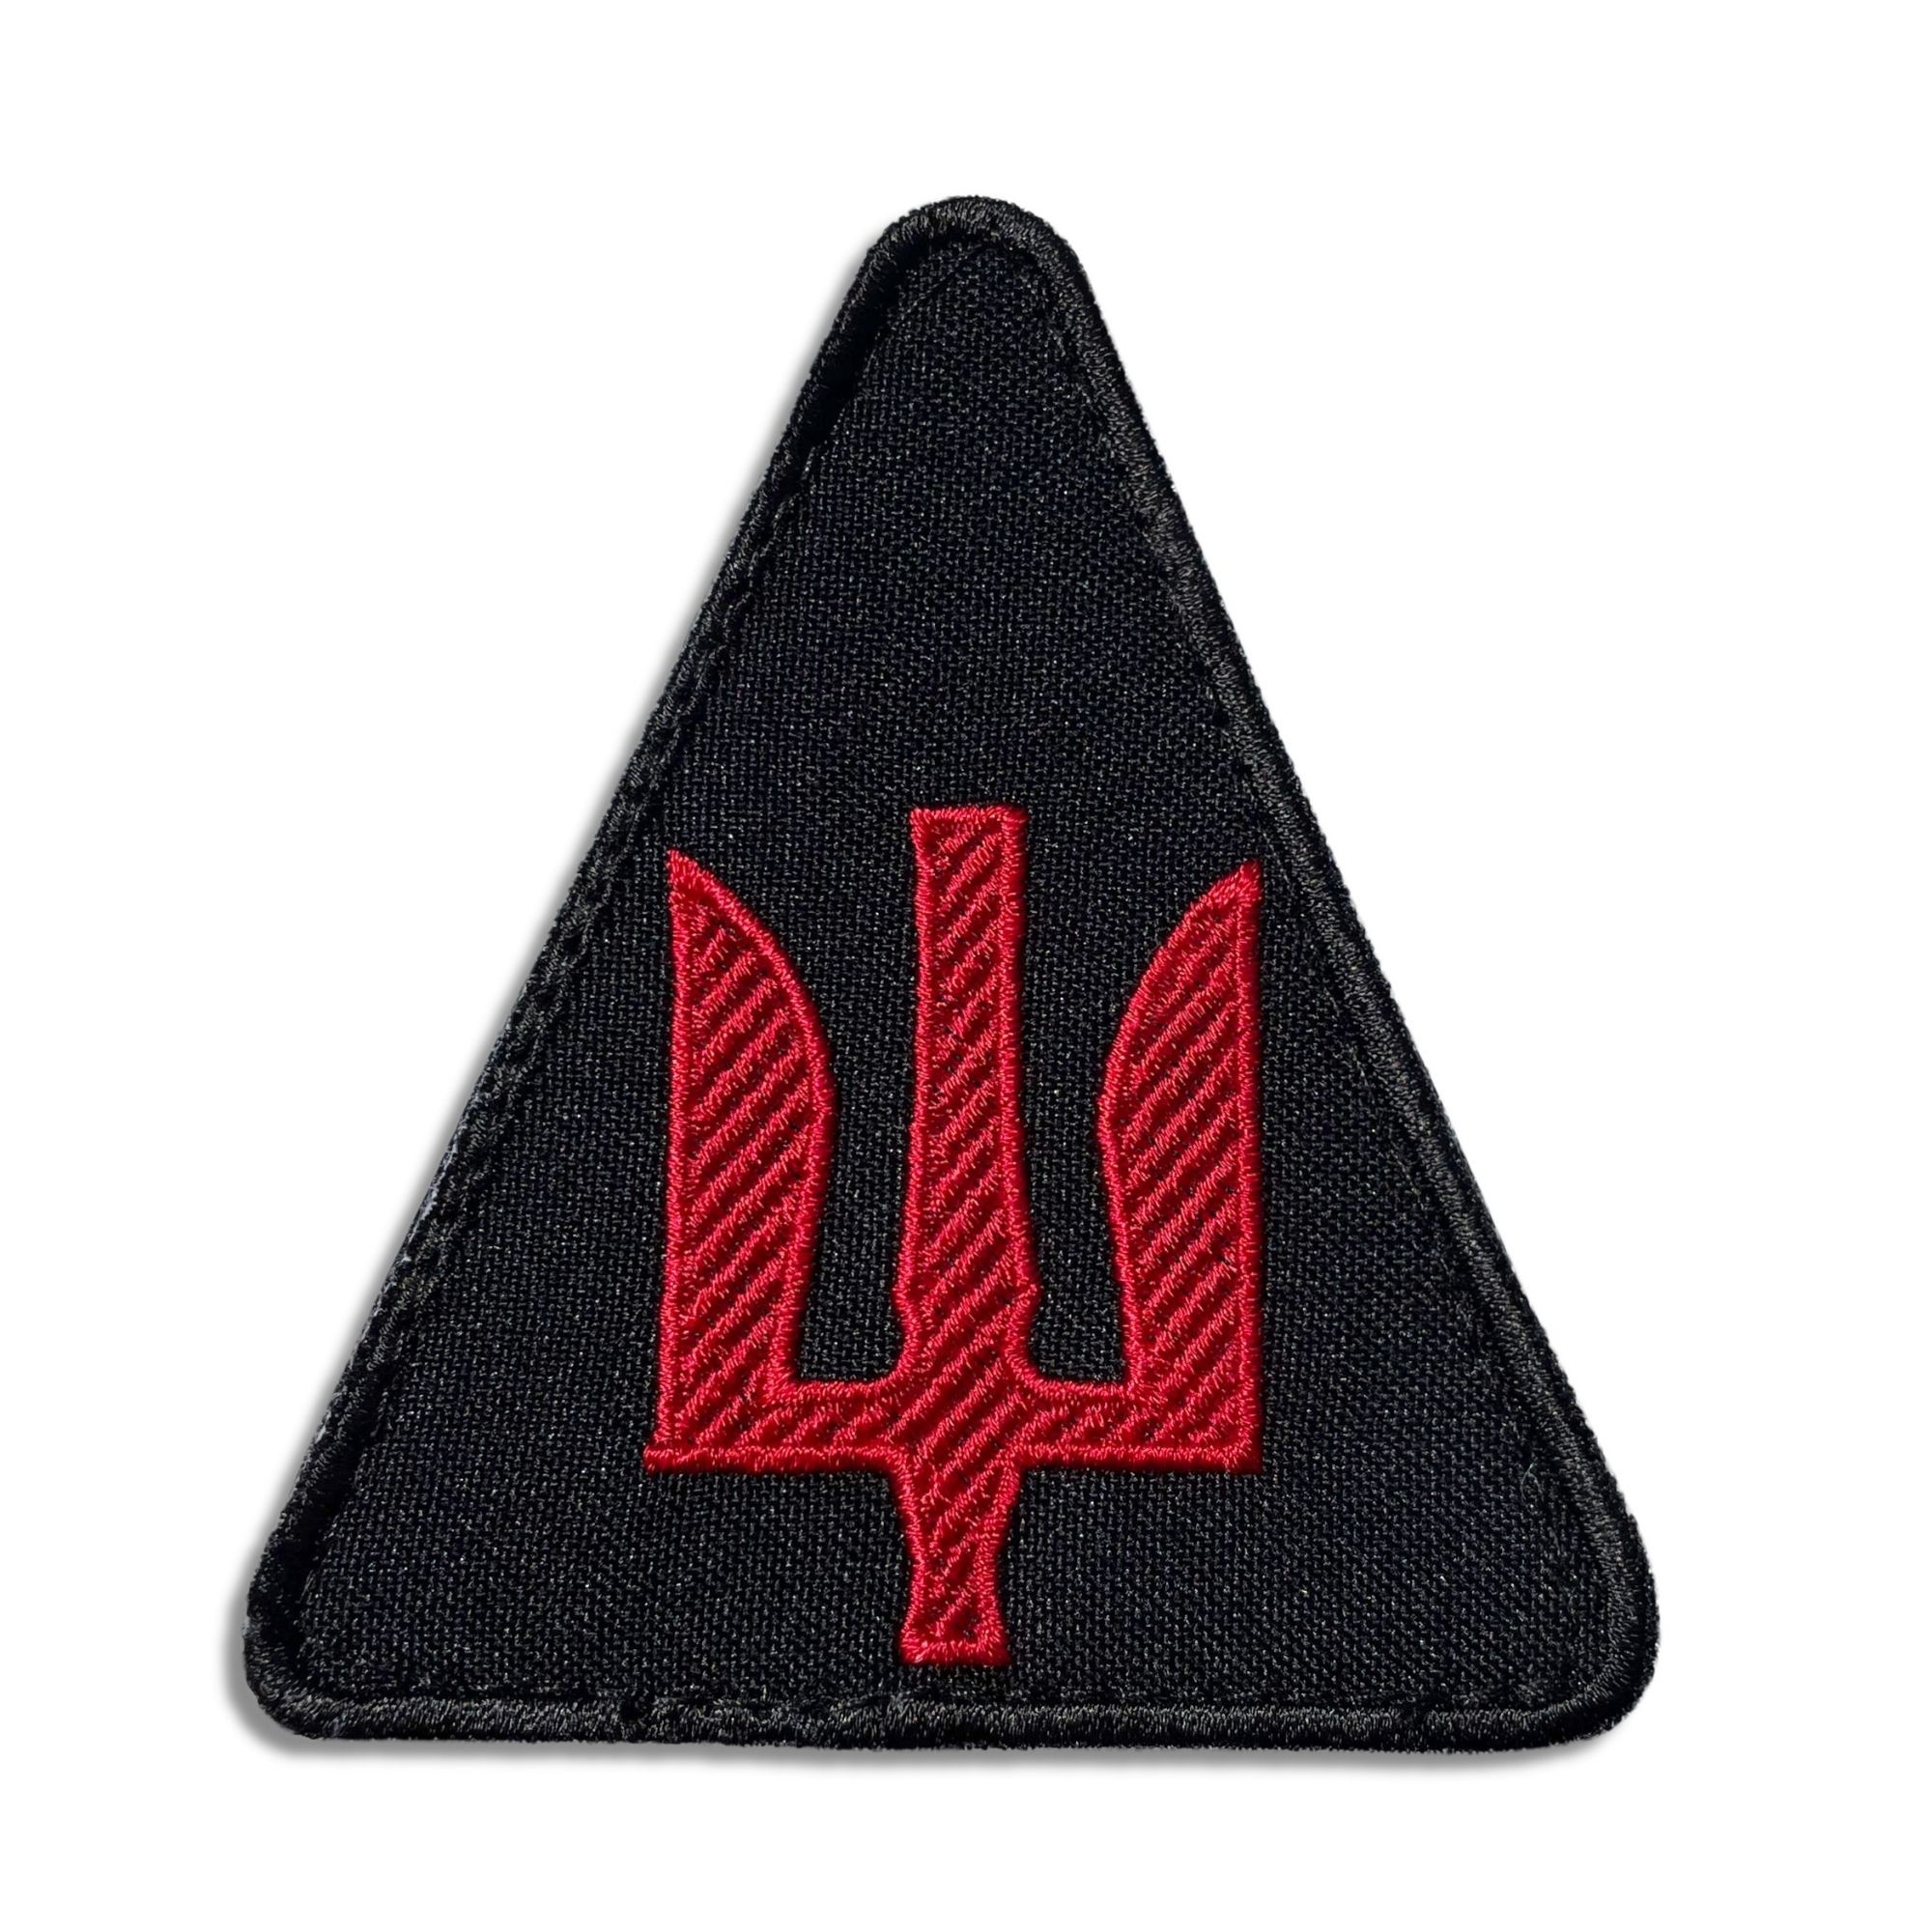 CHEVRON ON VELCRO AIR FORCE AND AVIATION FORCES OF UKRAINE 8X9 CM